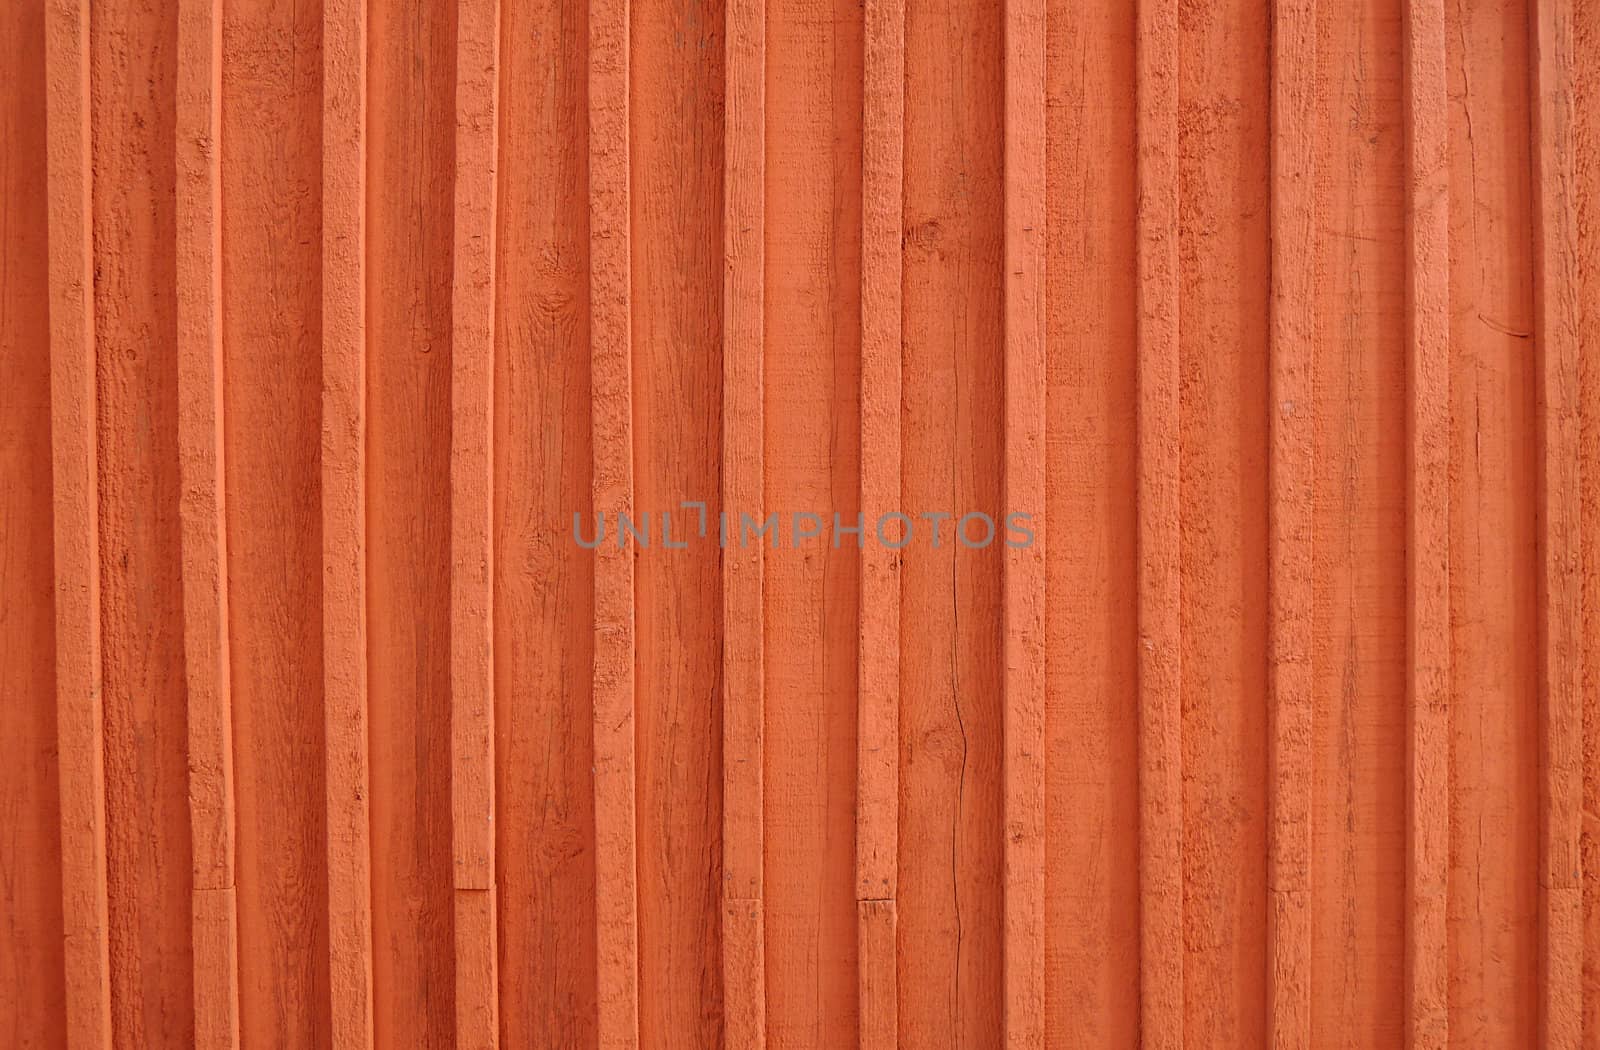 Background image of a wooden wall painted in bright red color by MalyDesigner